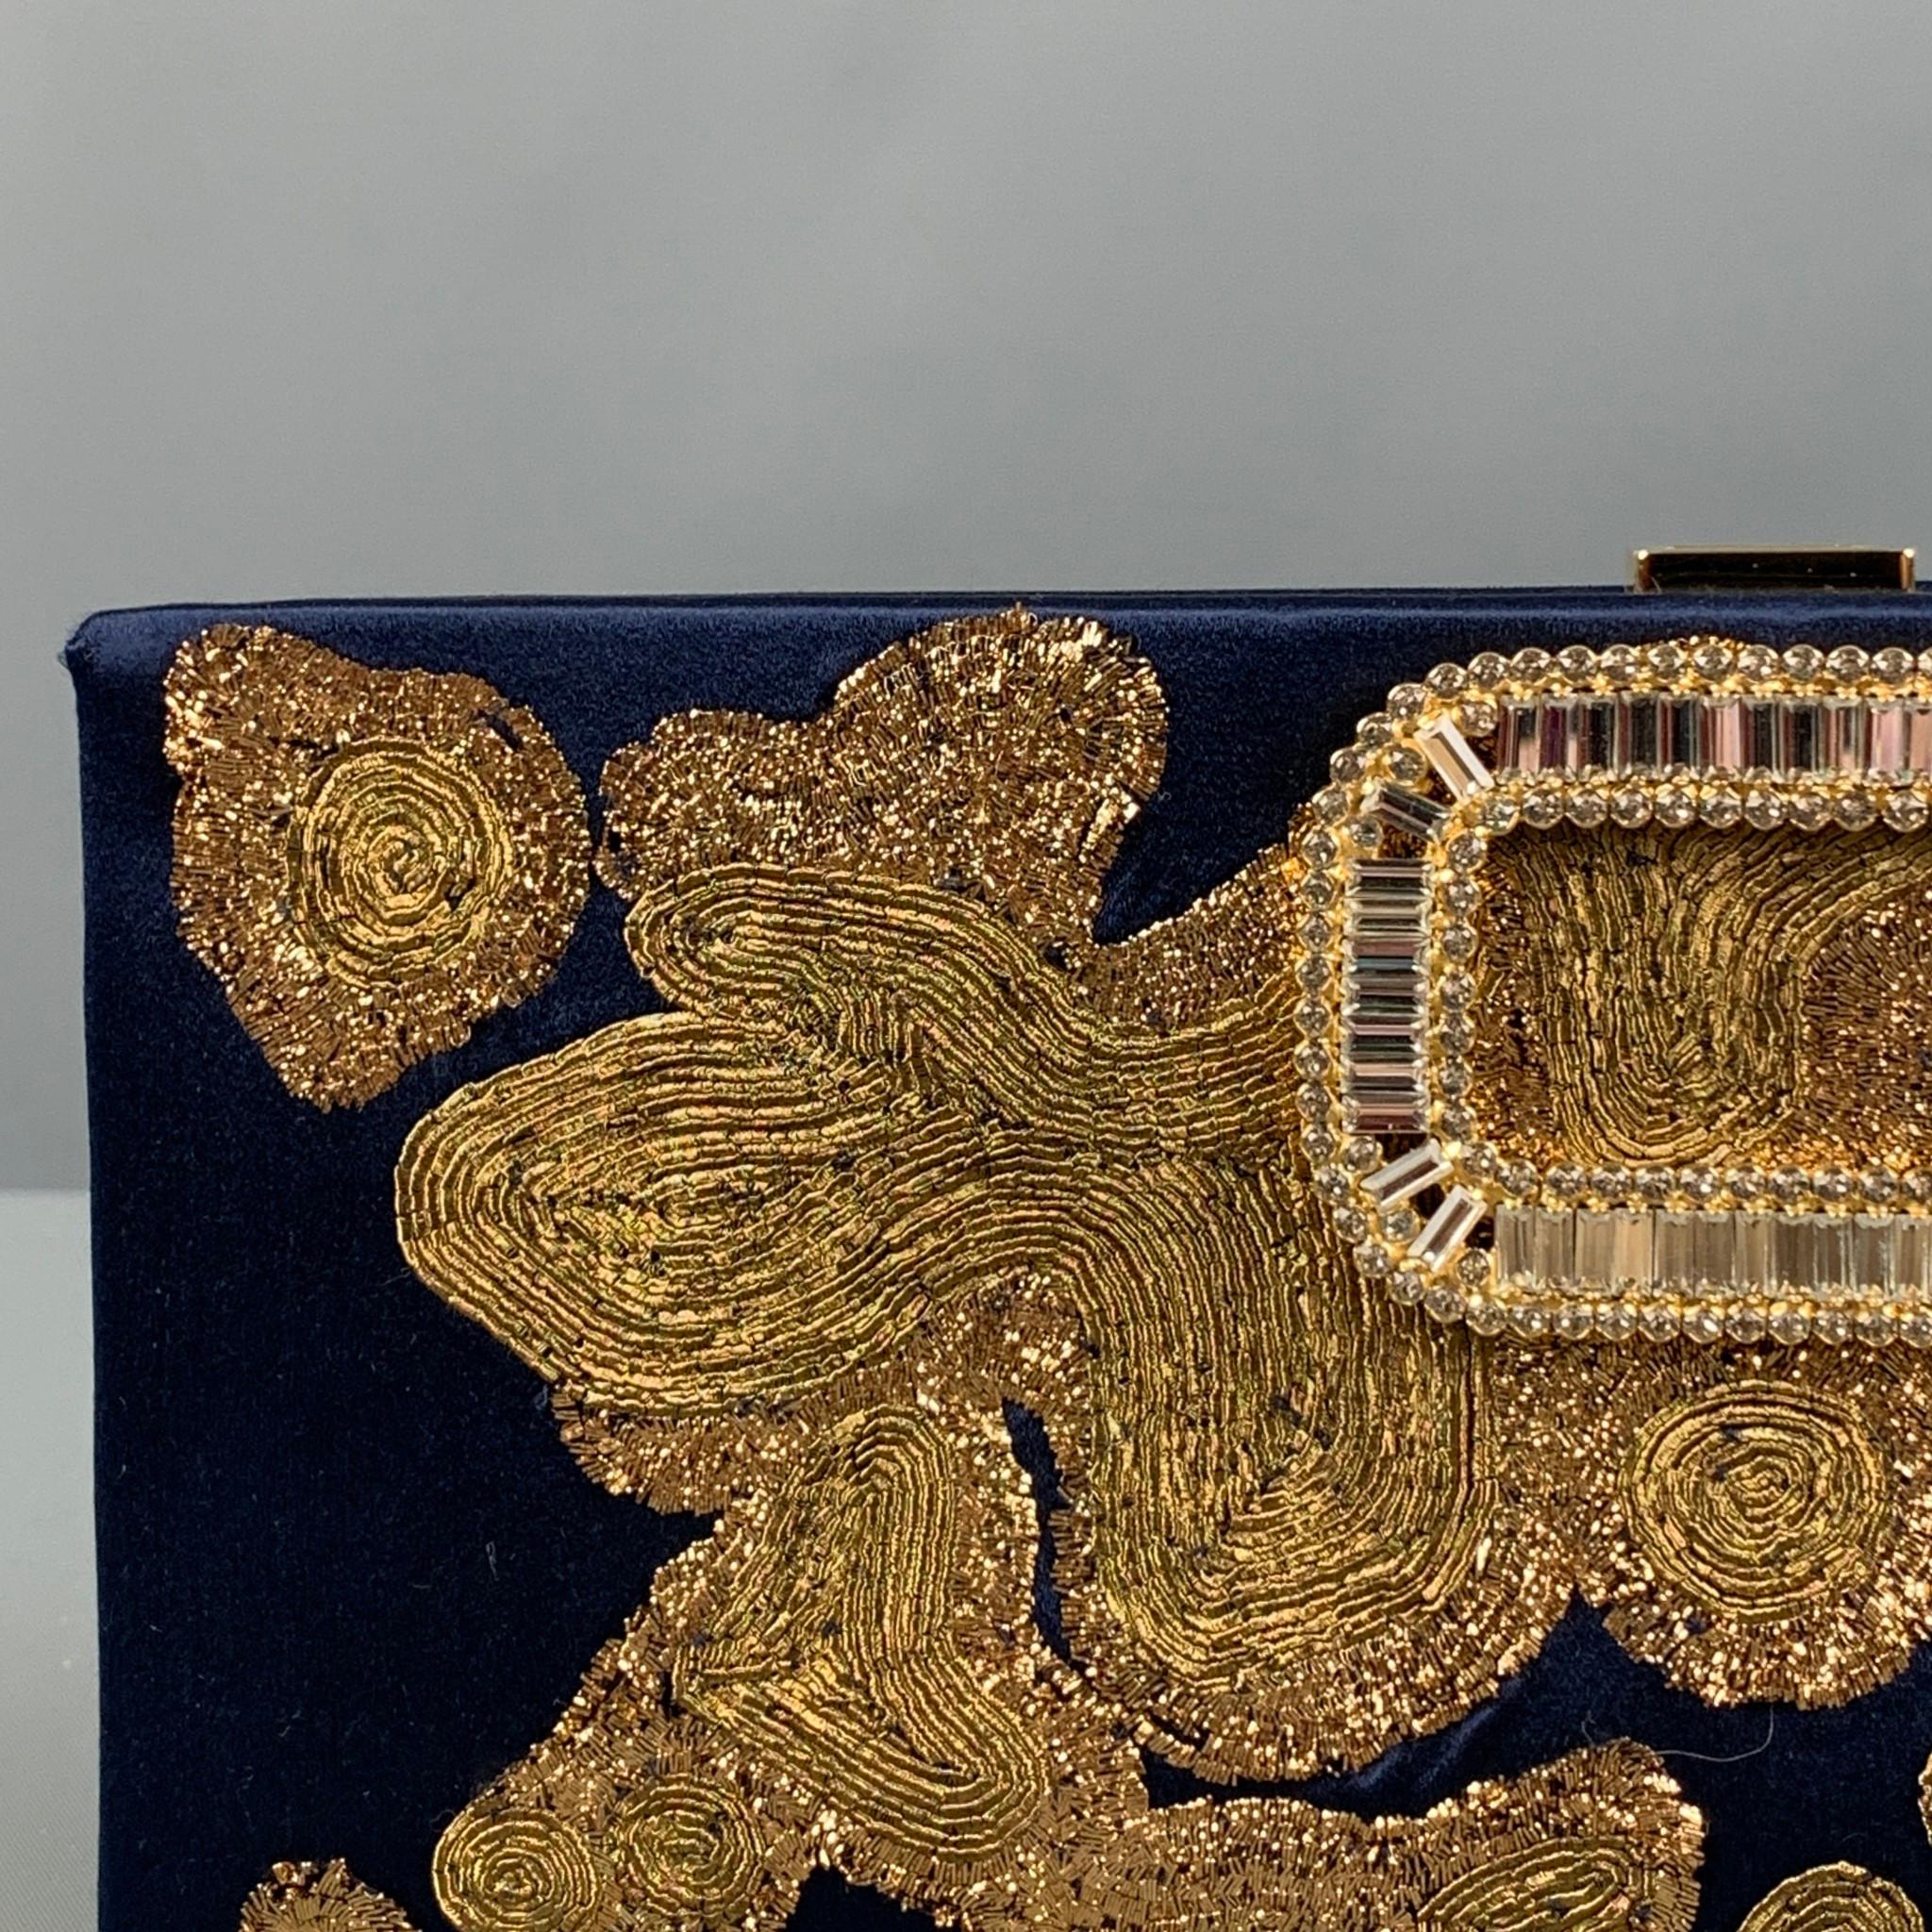 ROGER VIVIER clutch handbag comes in a navy silk featuring gold embroidered design throughout, crystal embellished detail, gold tone shoulder strap, push lock closure. 

Excellent Pre-Owned Condition.
Original Retail Price: